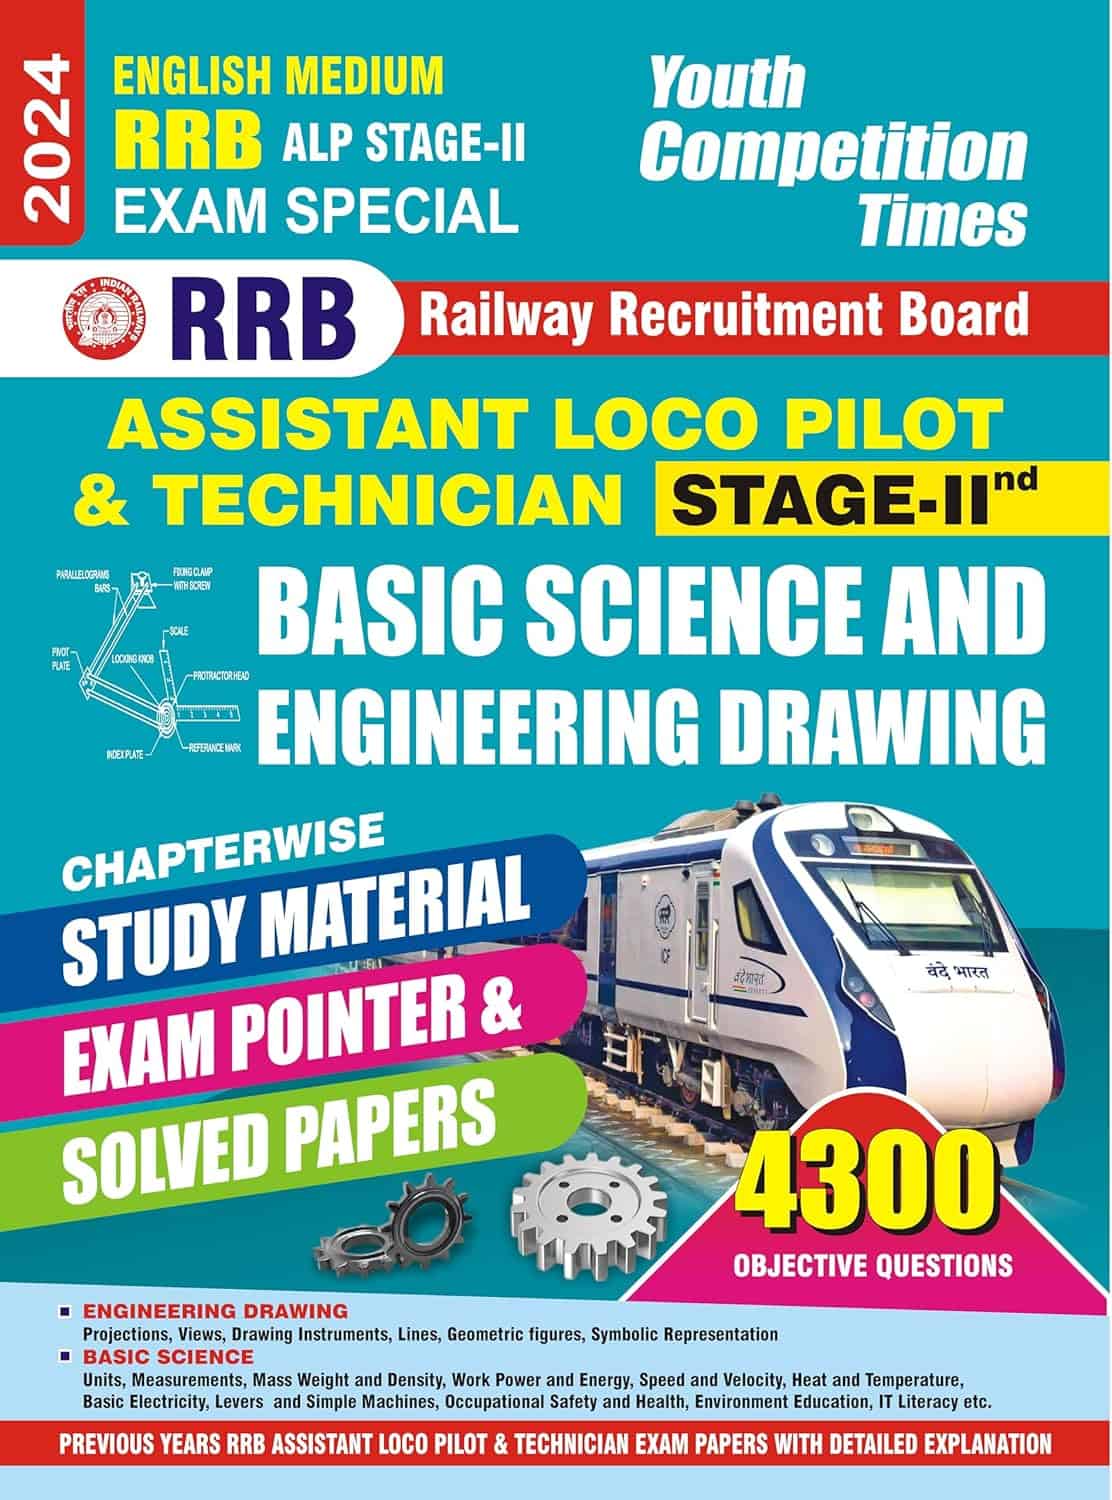 YCT RRB ALP Stage-II Engineering Drawing & Basic Science PDF